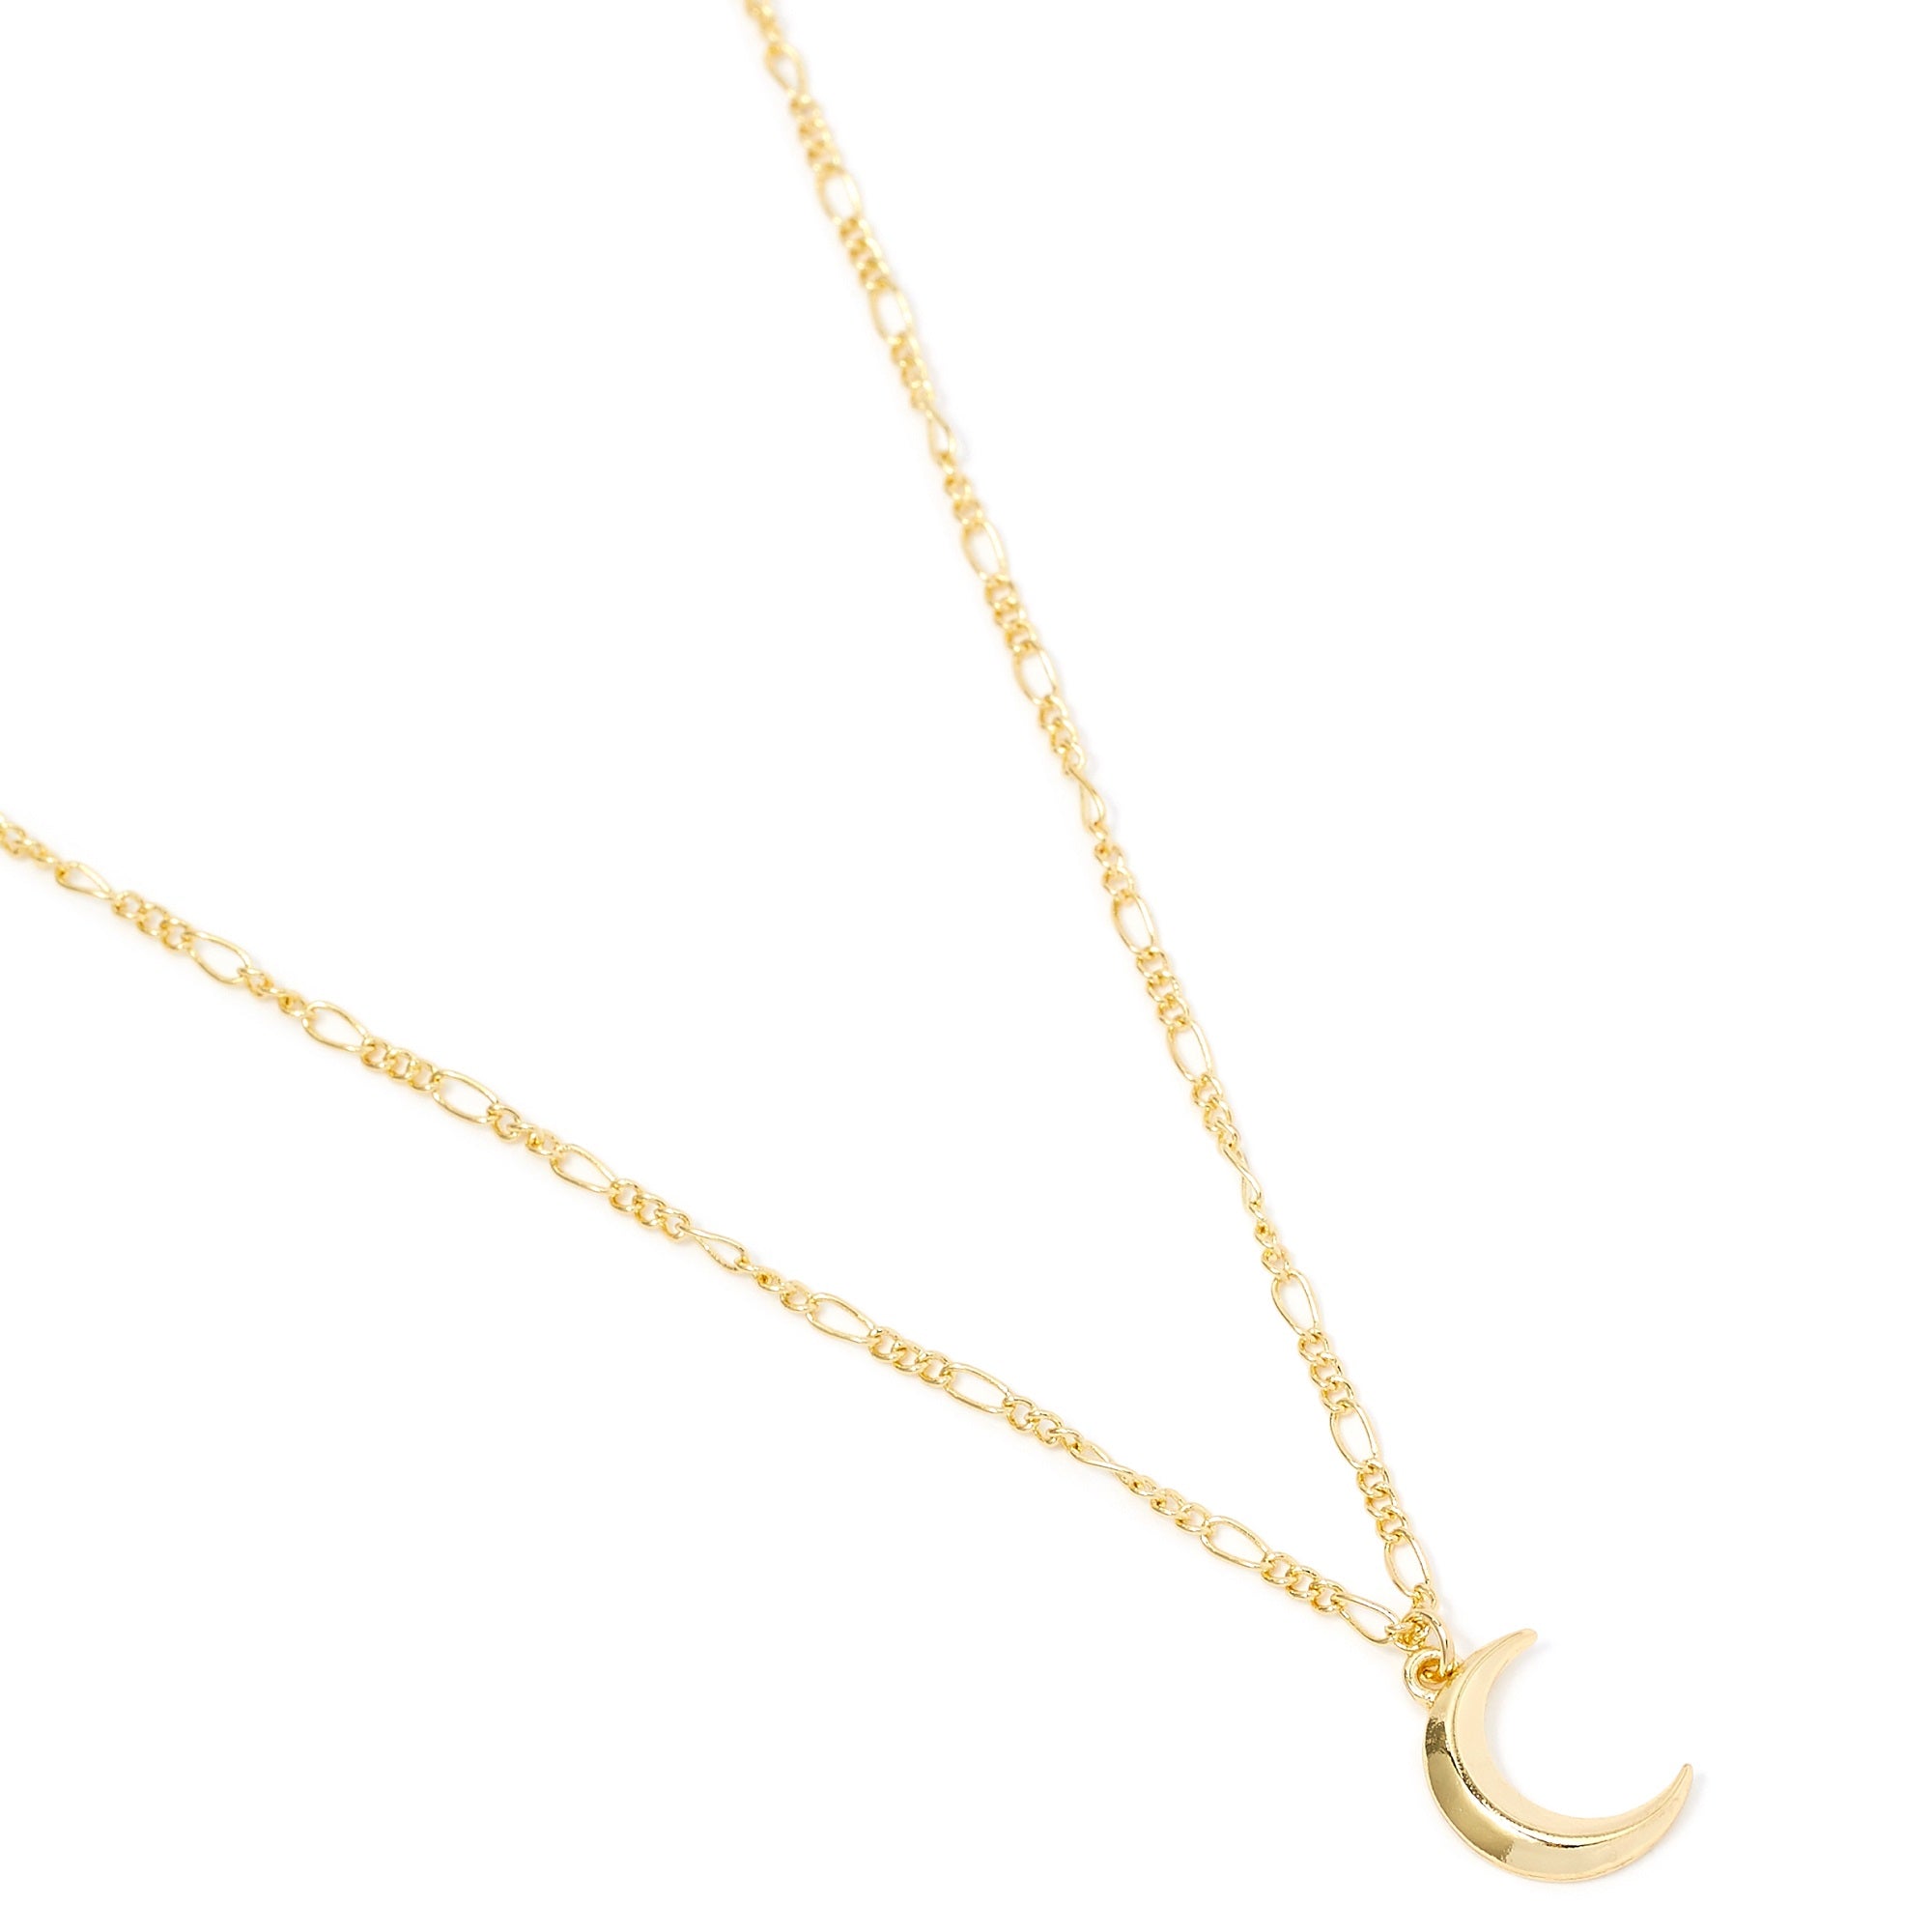 Accessorize London Women's Gold Carded Gifting Moon Necklace